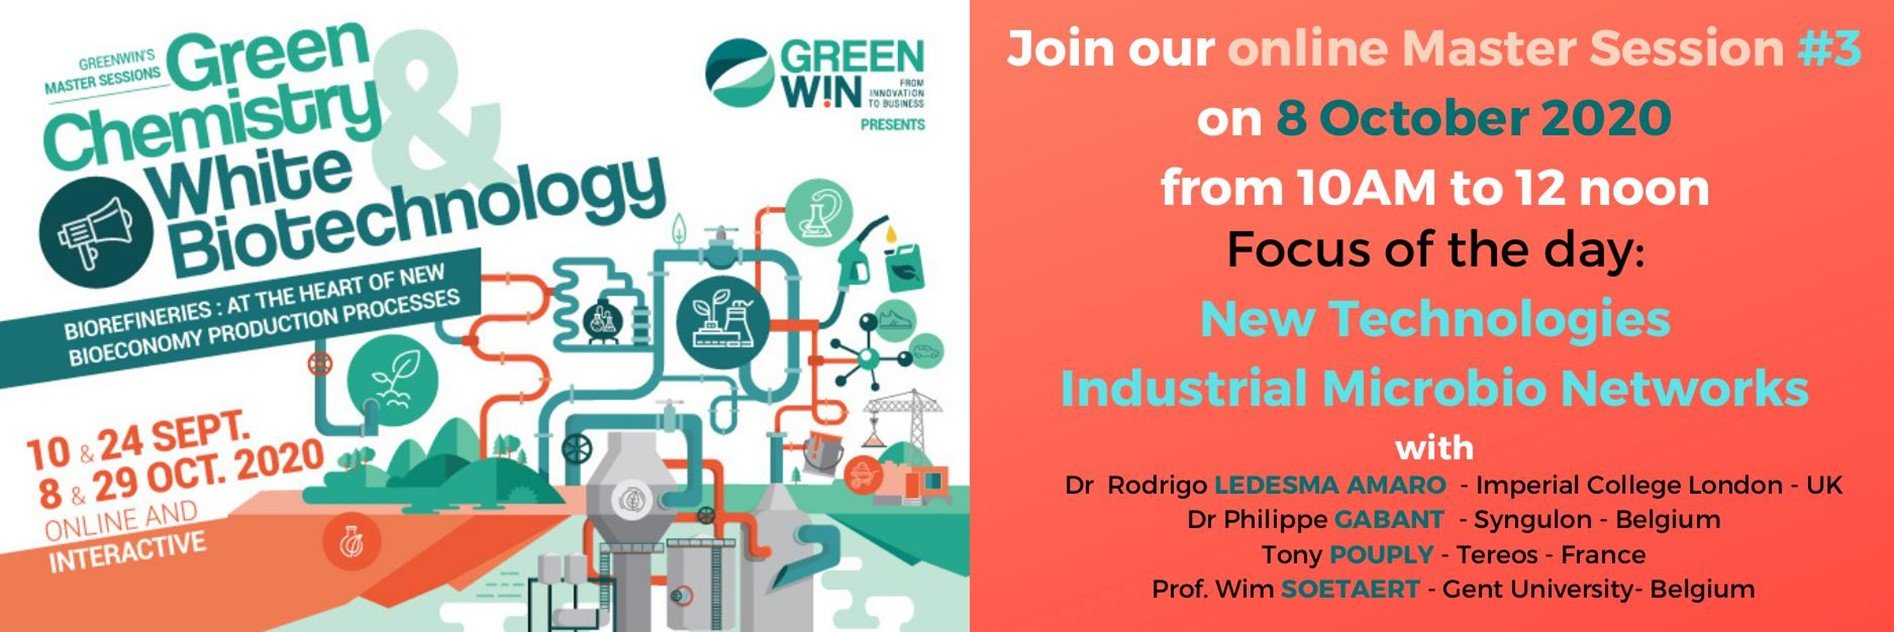 Join us on the 3rd of our 4 Master Sessions, on  New Technologies and how industrial micro bio networks interact within biorefineries